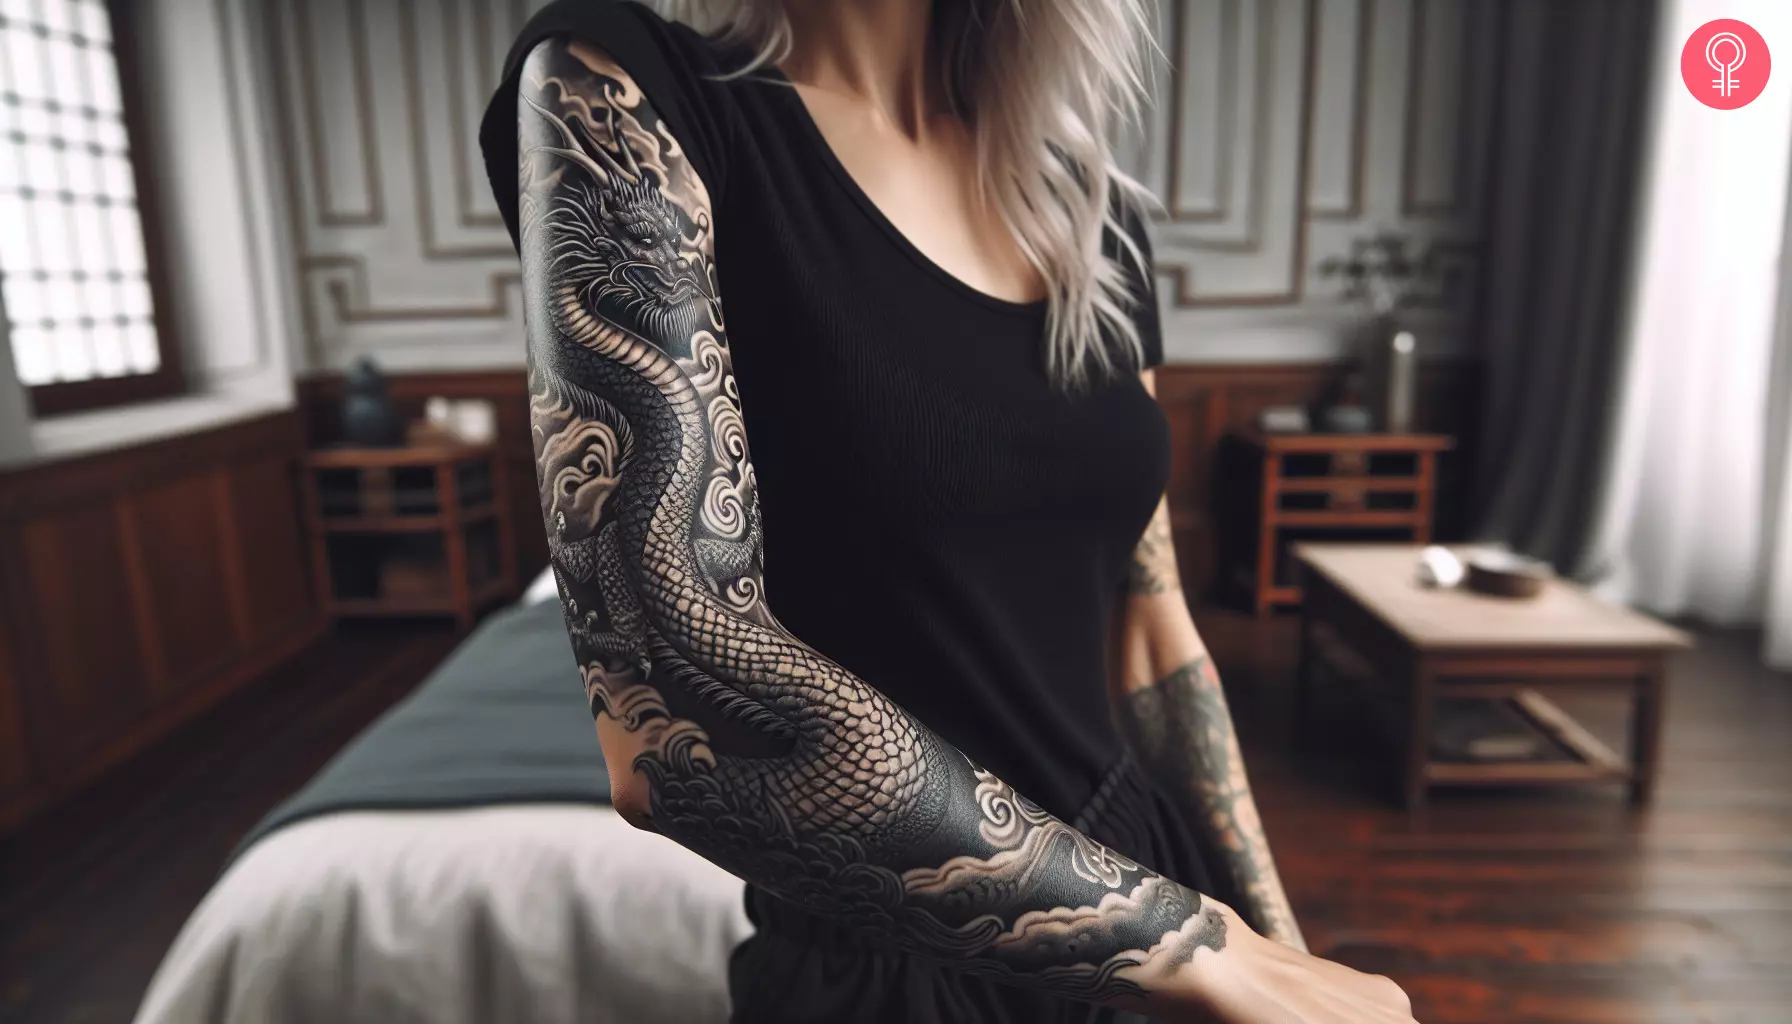 A black and gray Chinese dragon sleeve tattoo